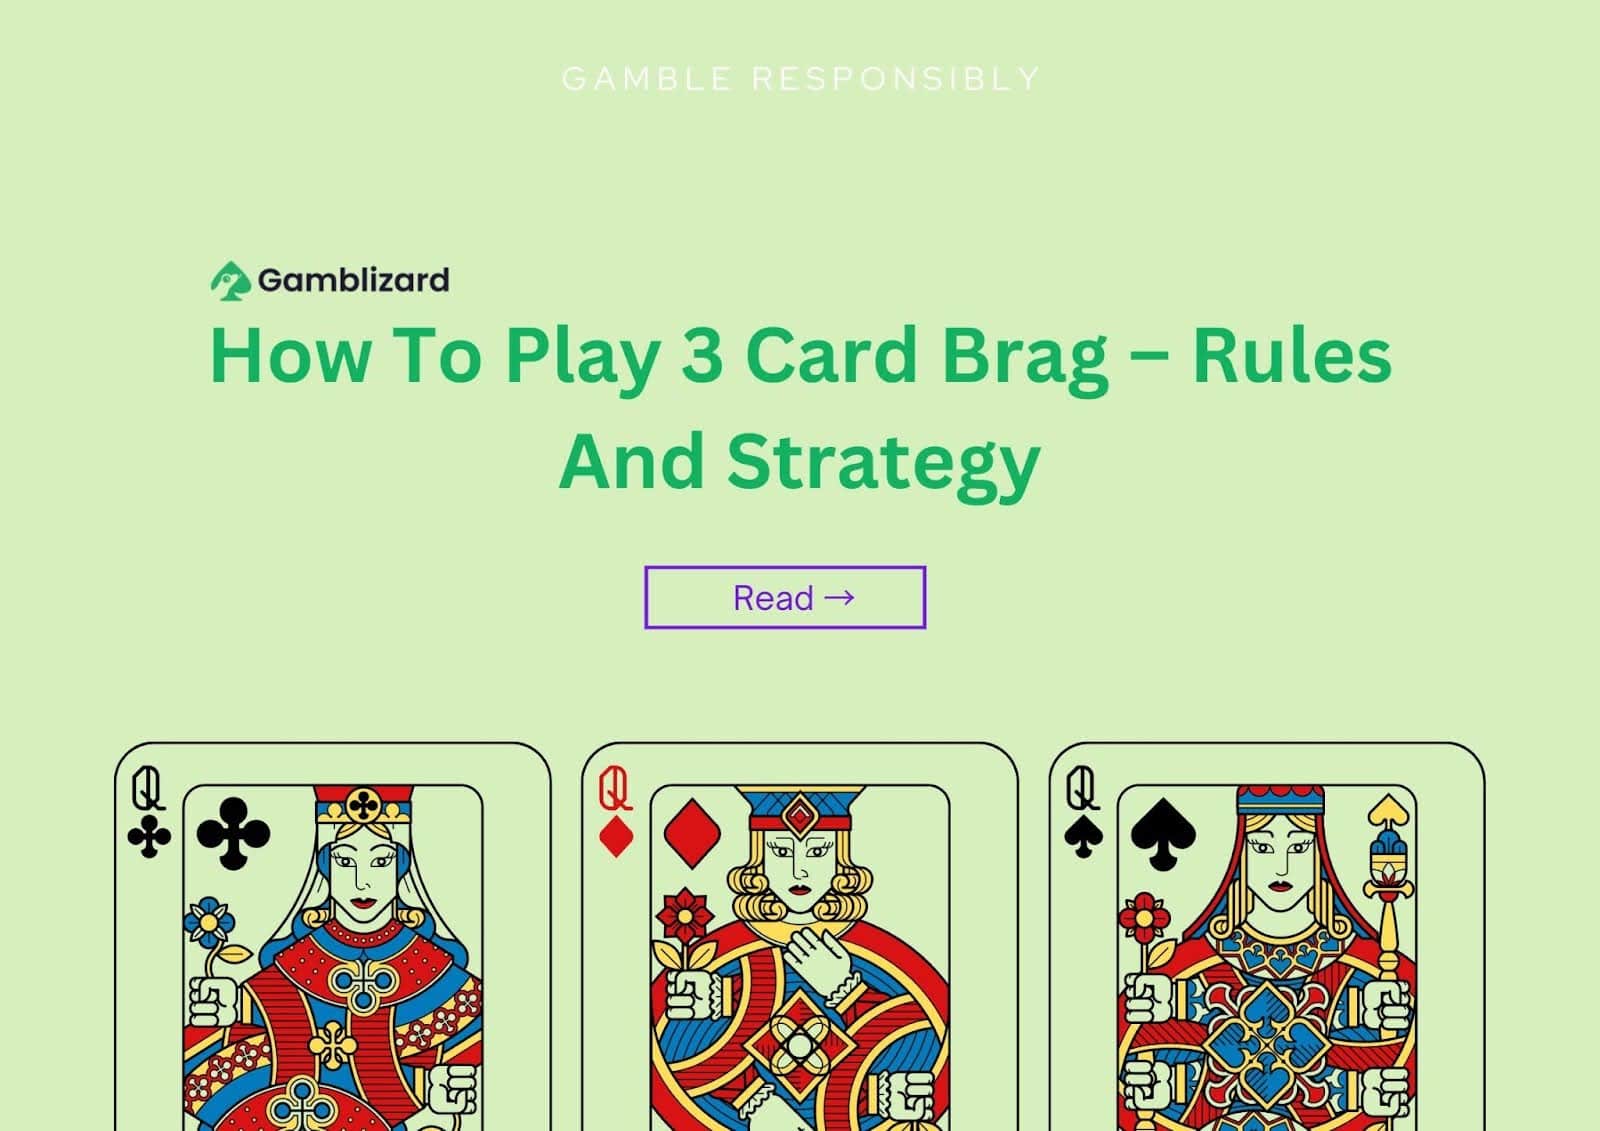 How to Play 3 Card Brag